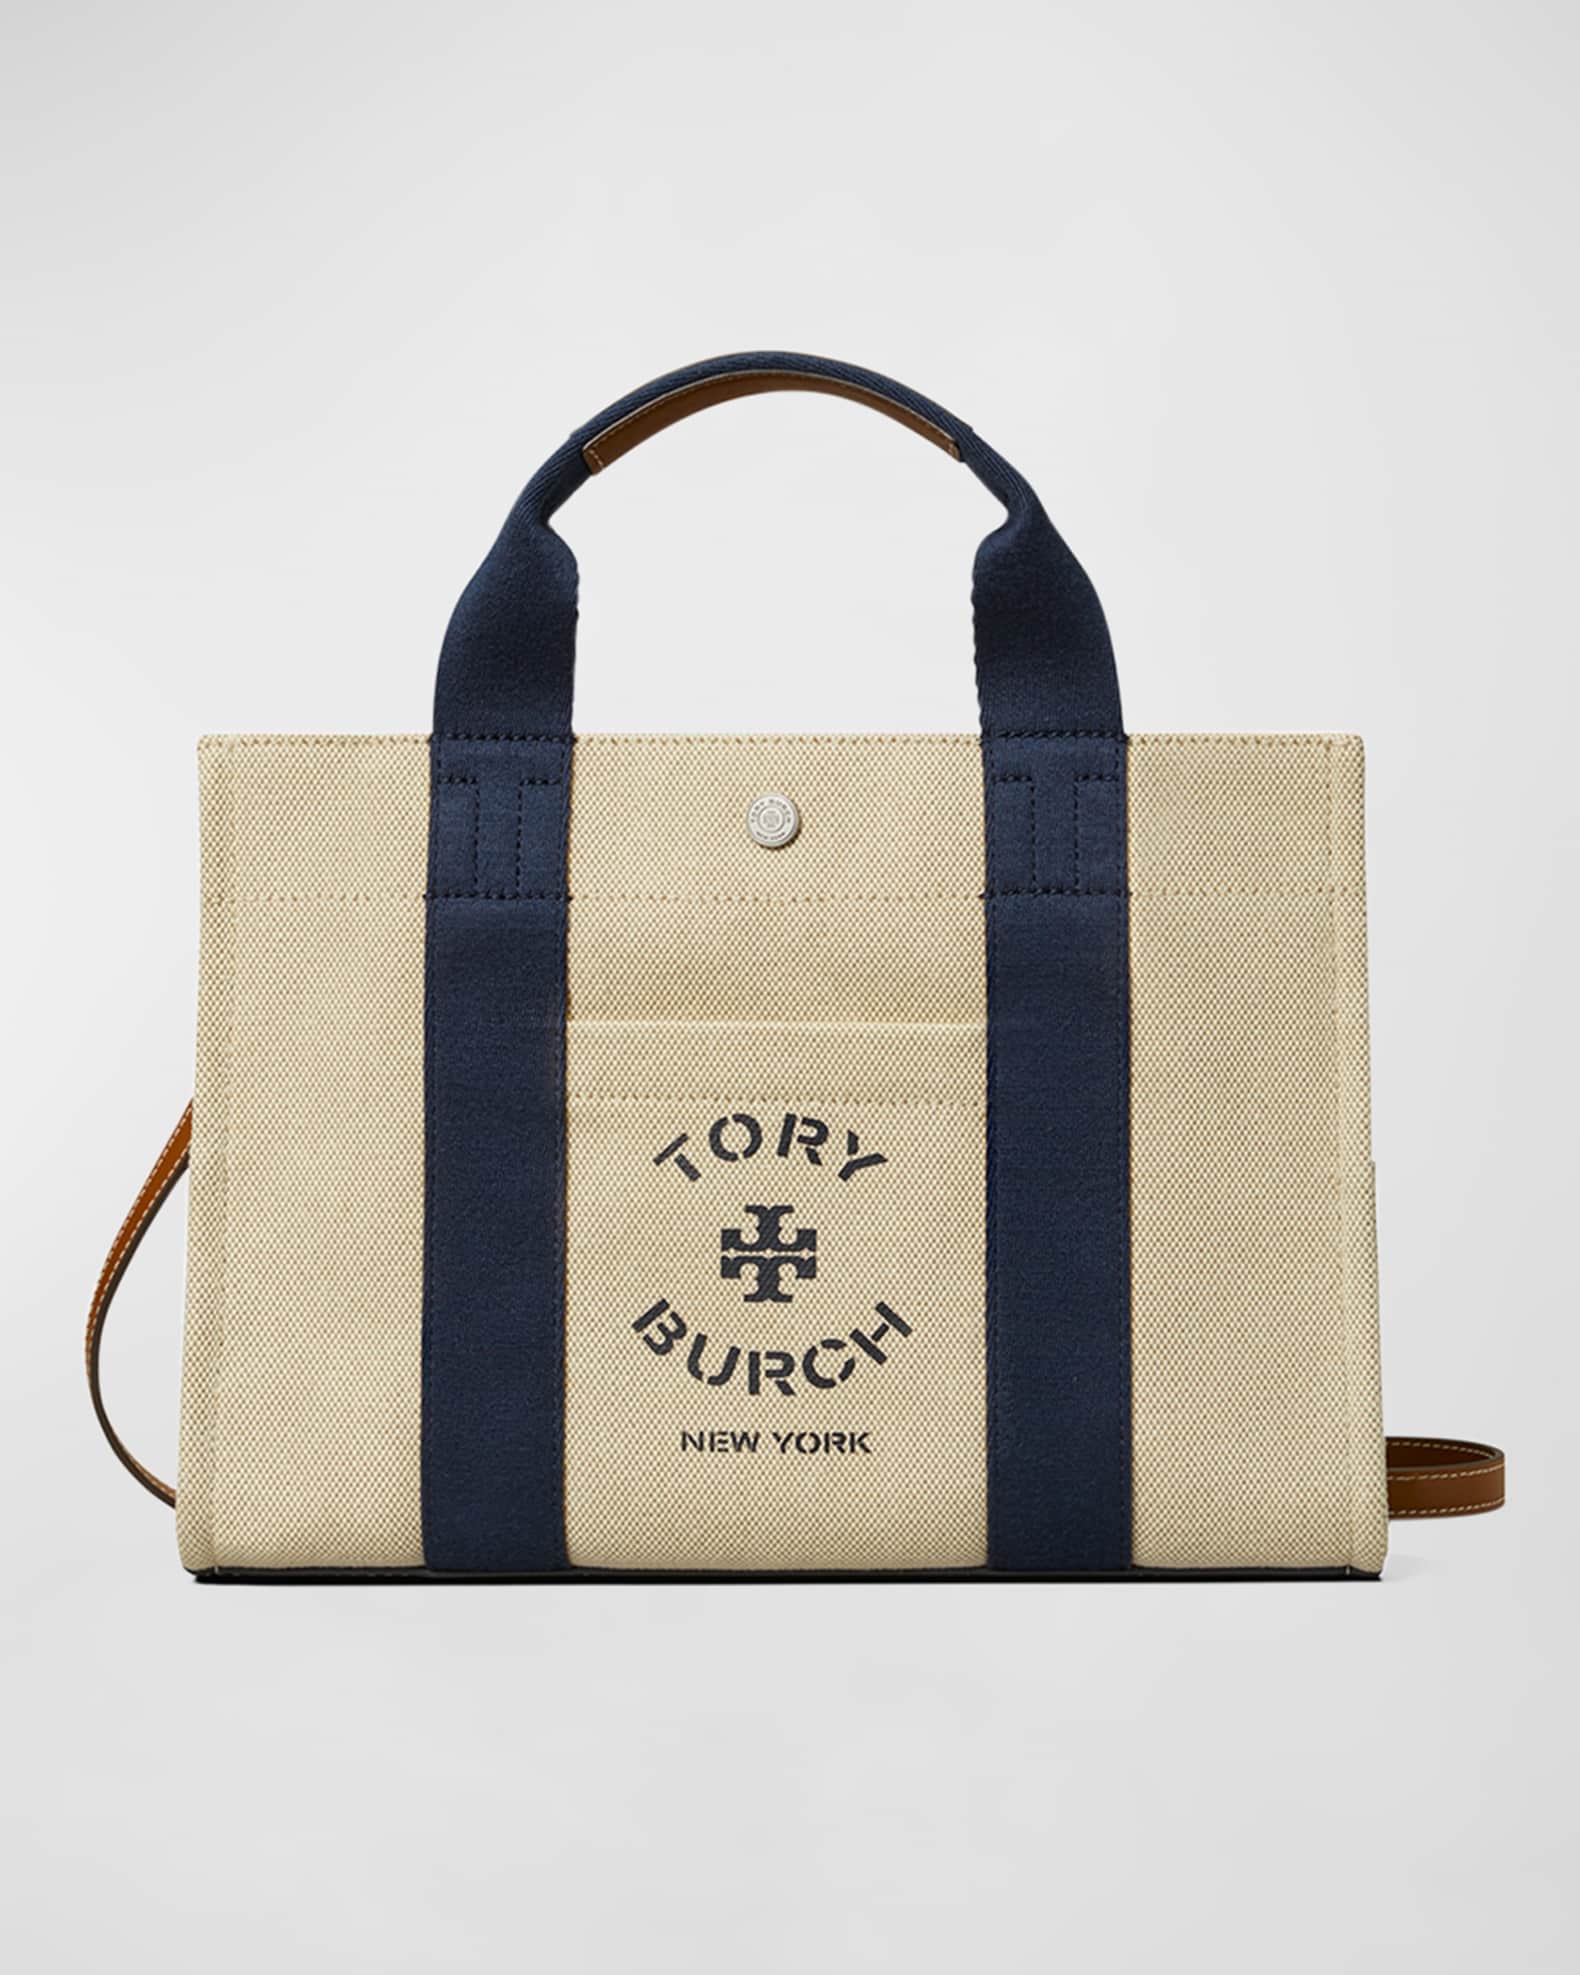 Tote bag with logo